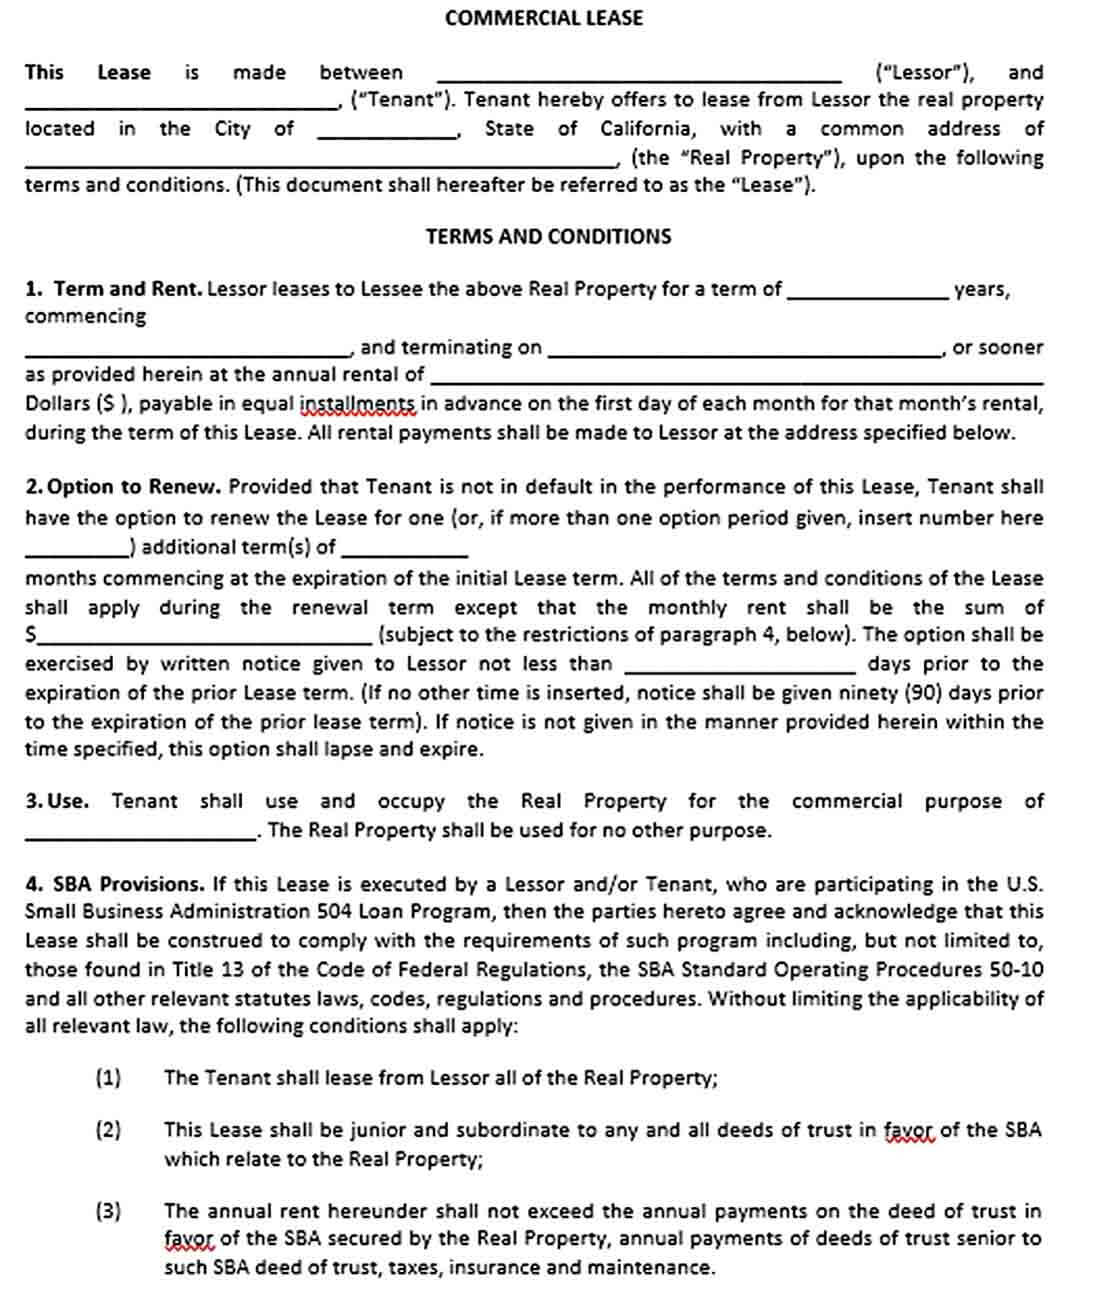 Sample Blank Commercial Lease Agreement